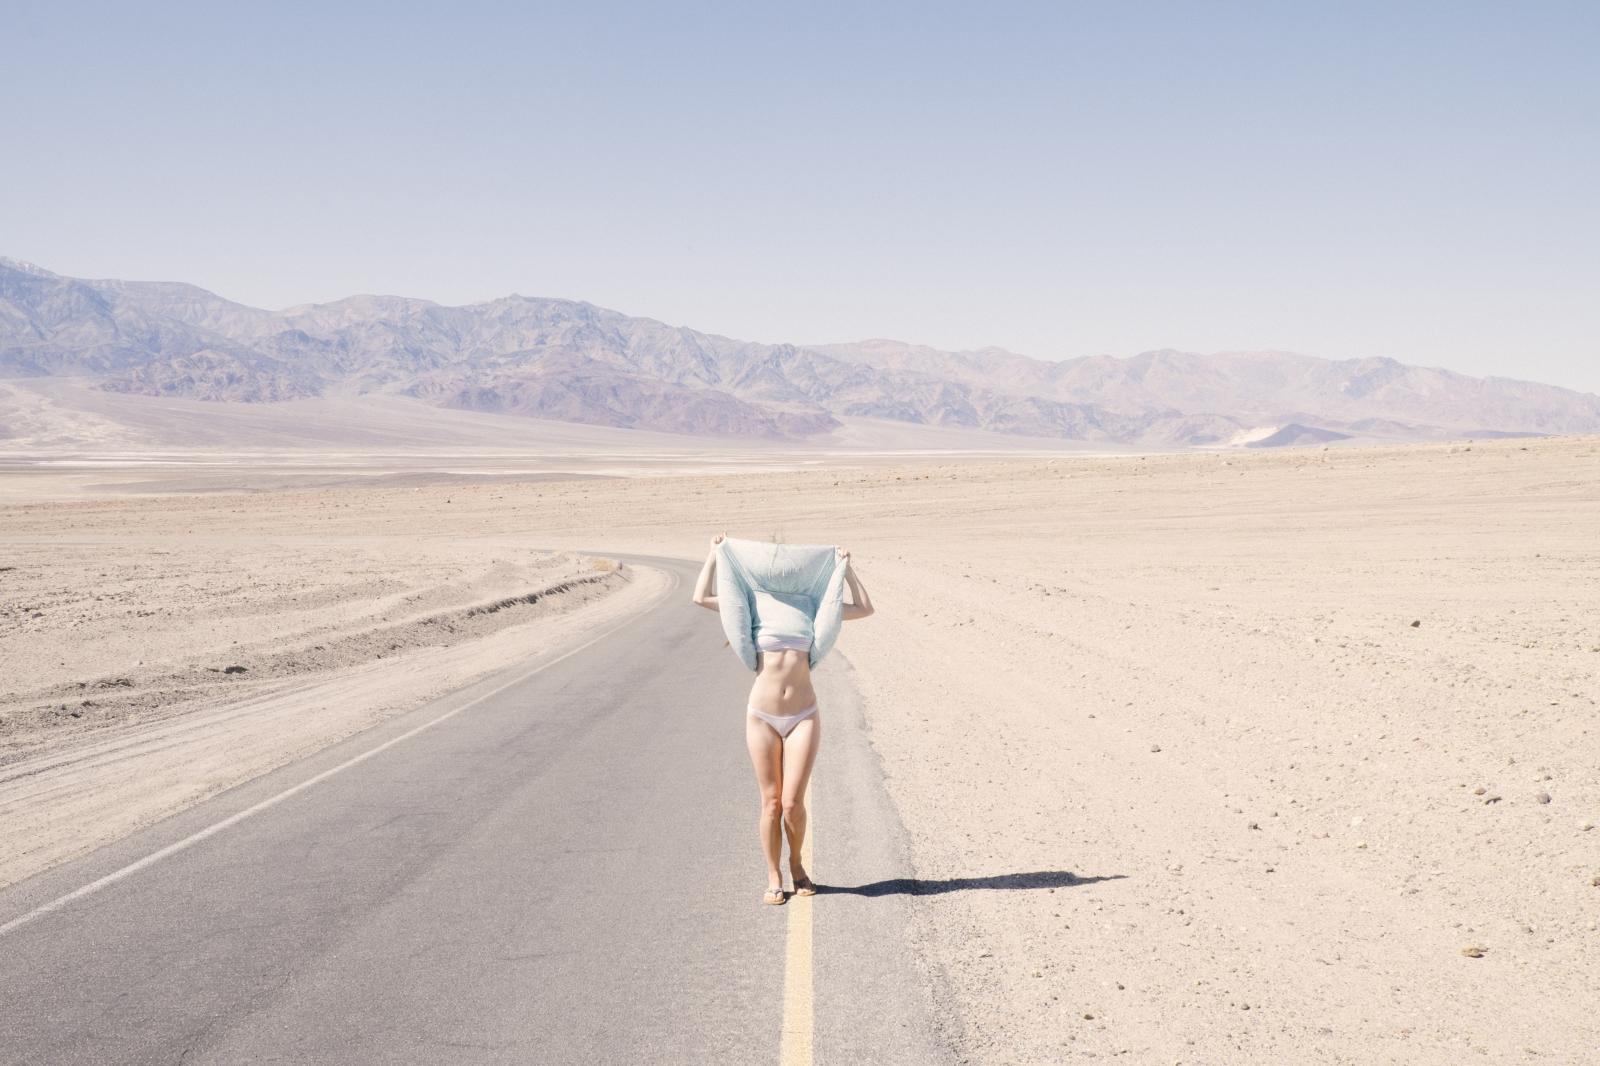 Woman on Highway, Death Valley